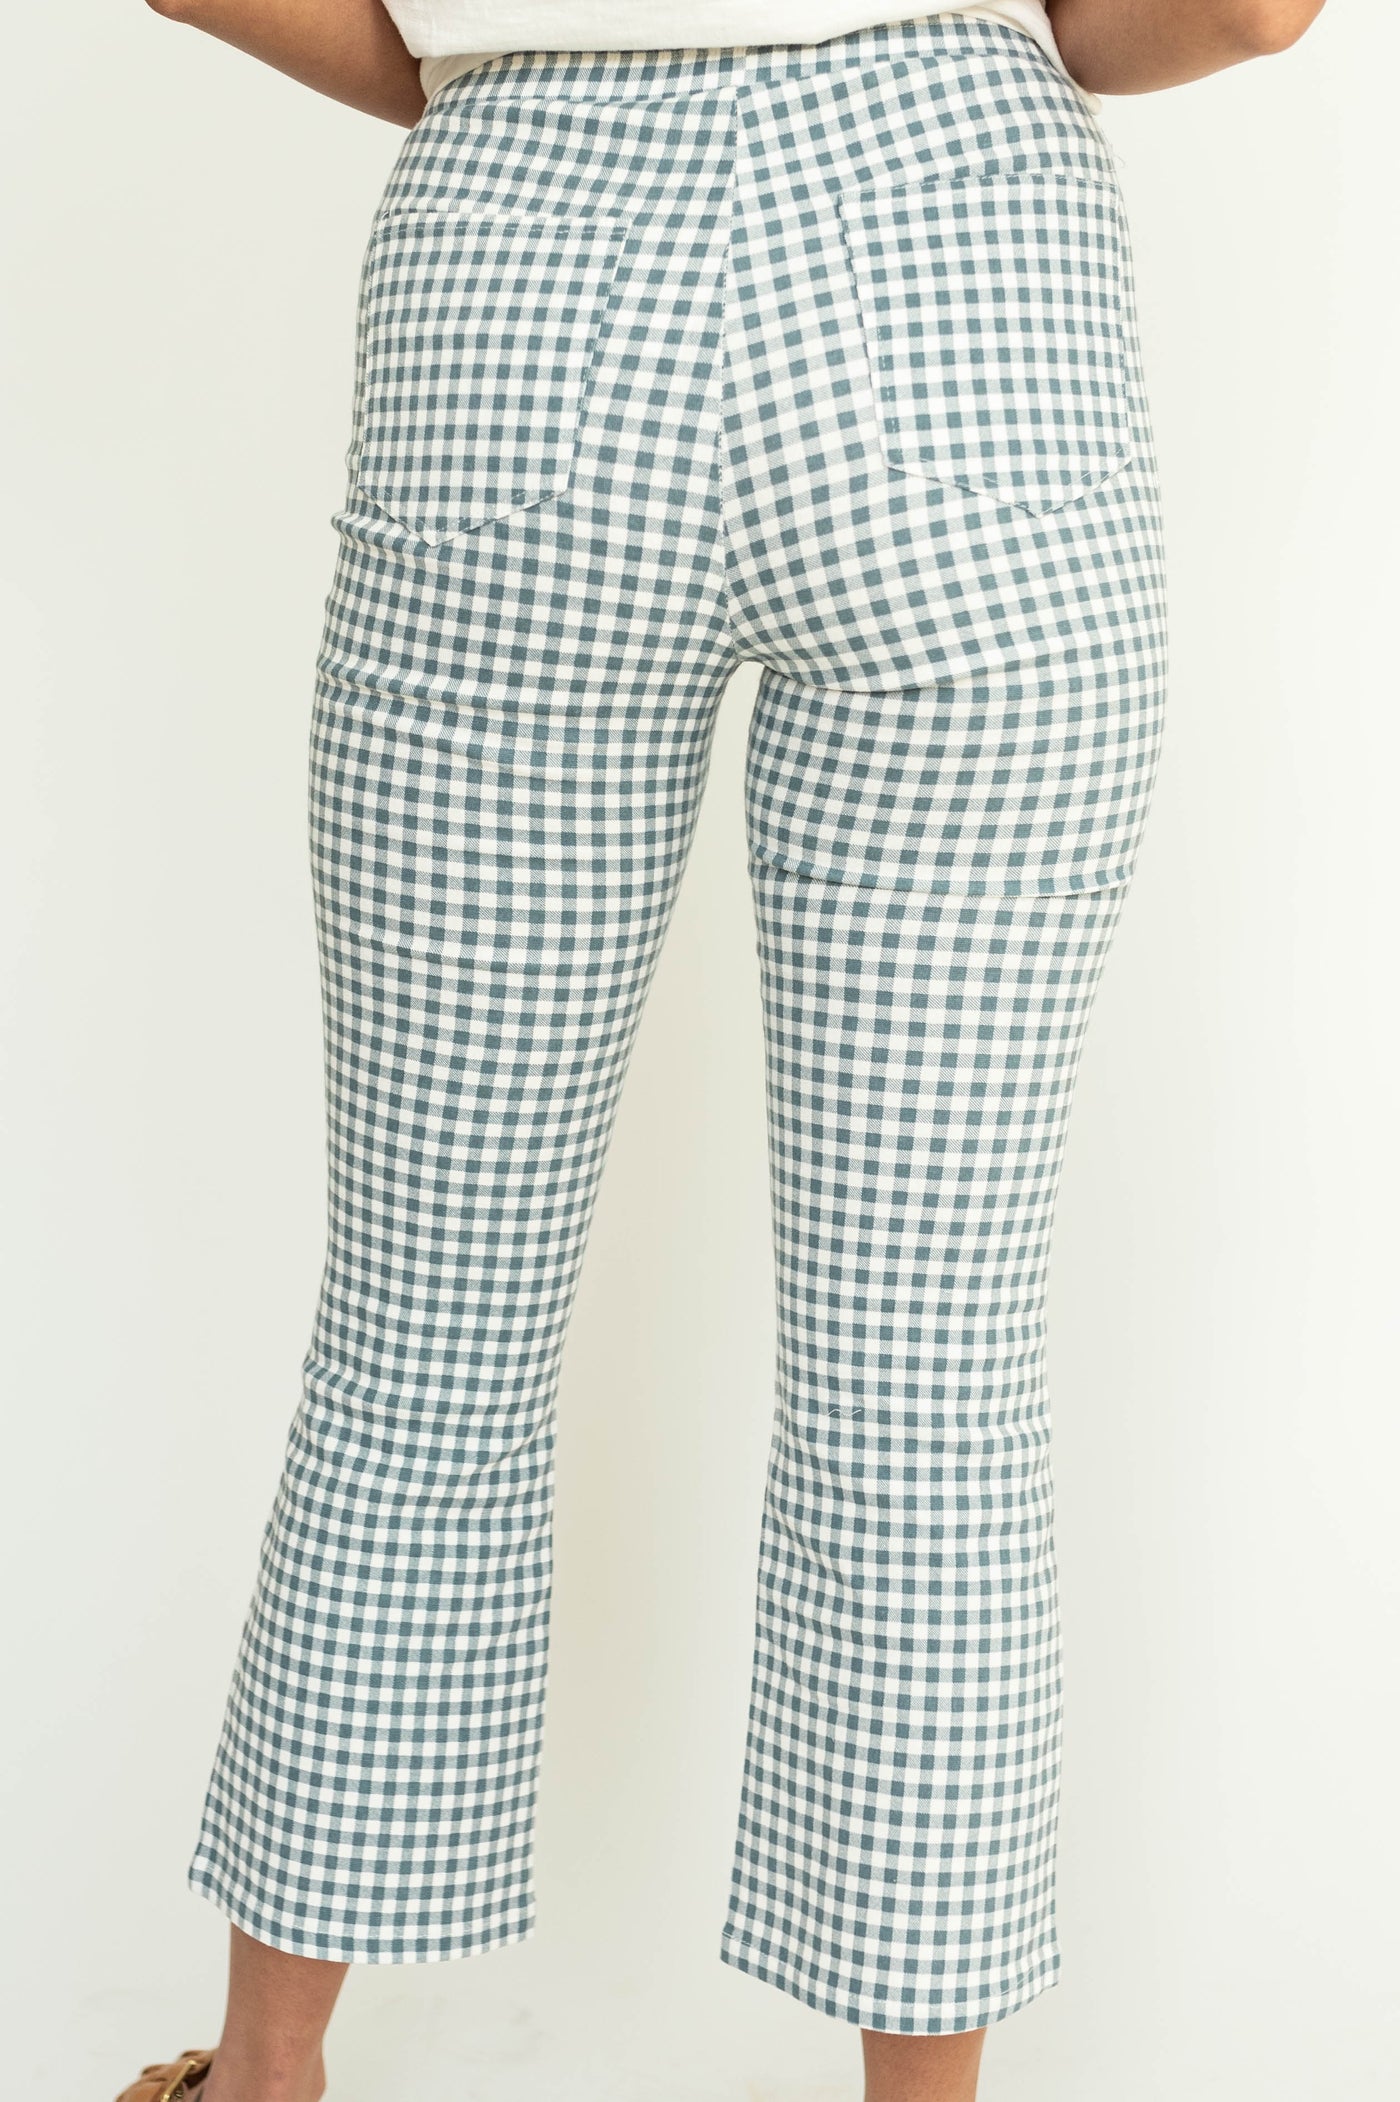 Back view of ankle length checkered seafoam straight leg pants.